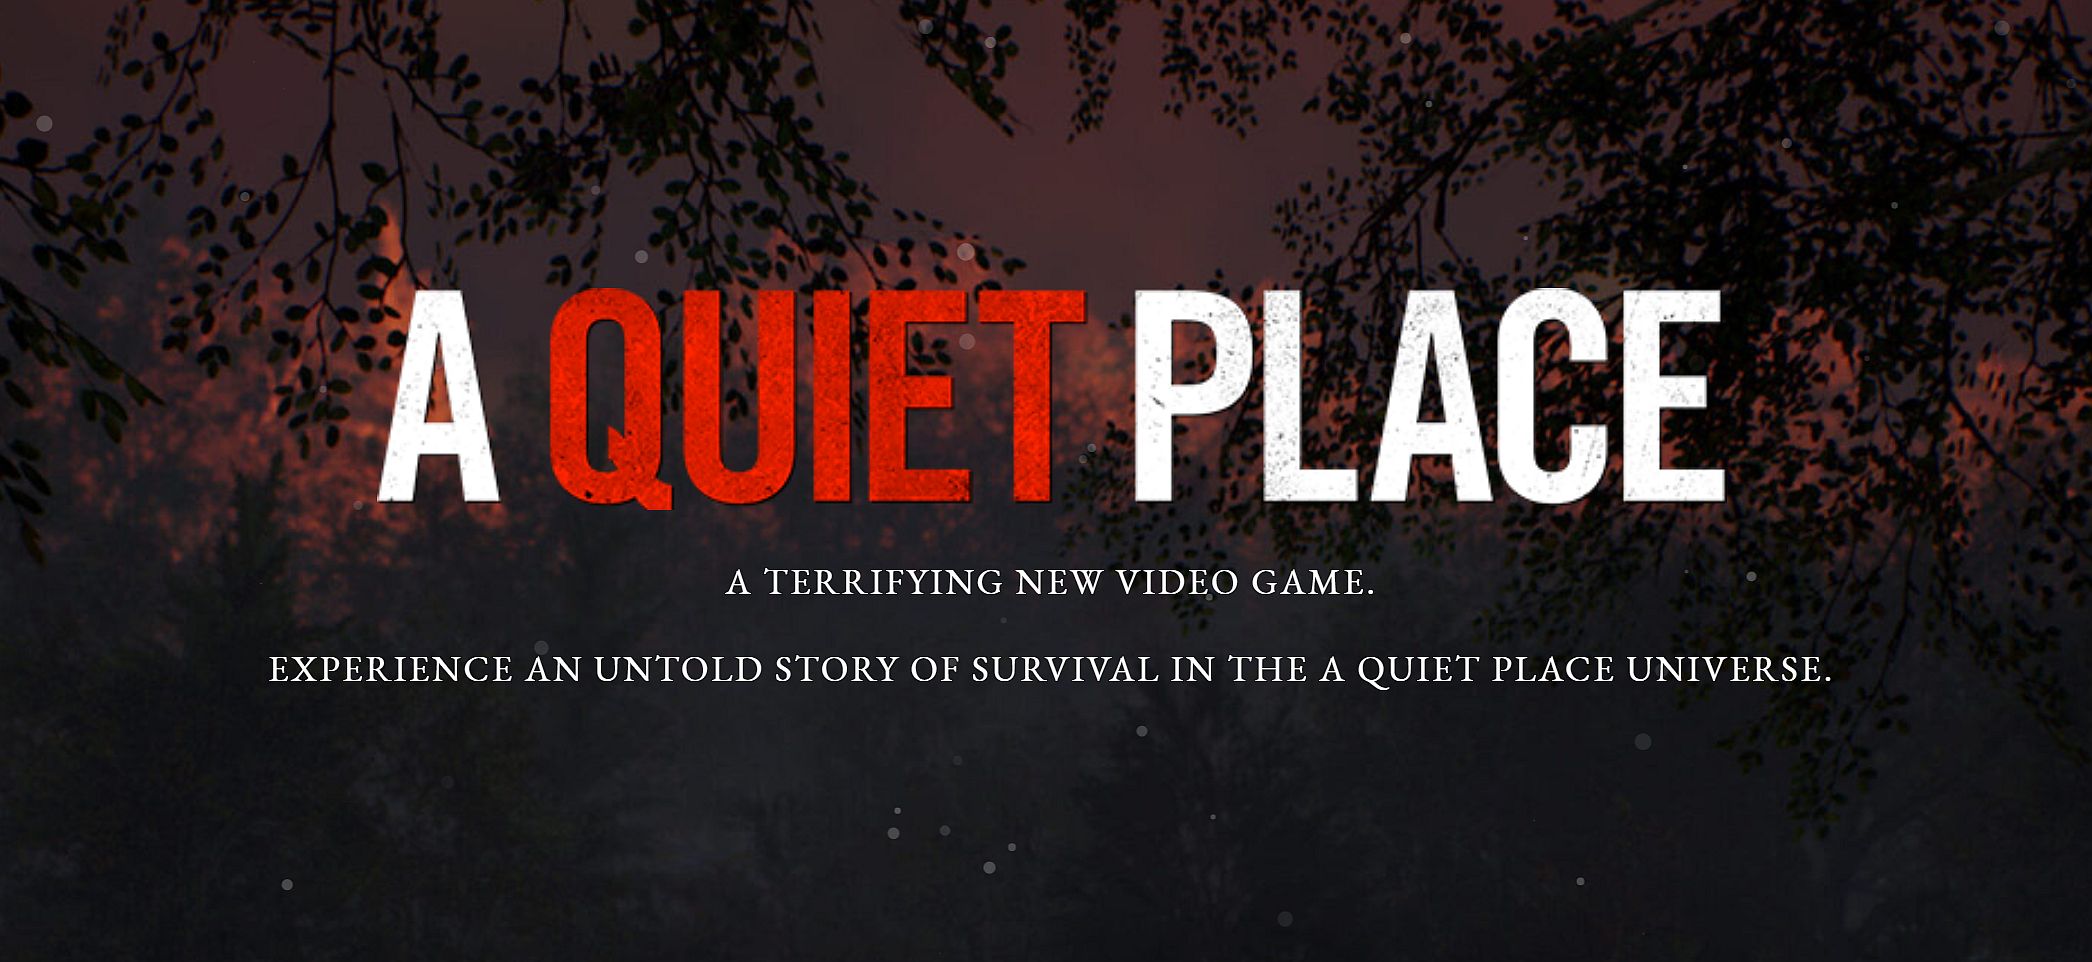 Image for There's a game based on A Quiet Place in the works